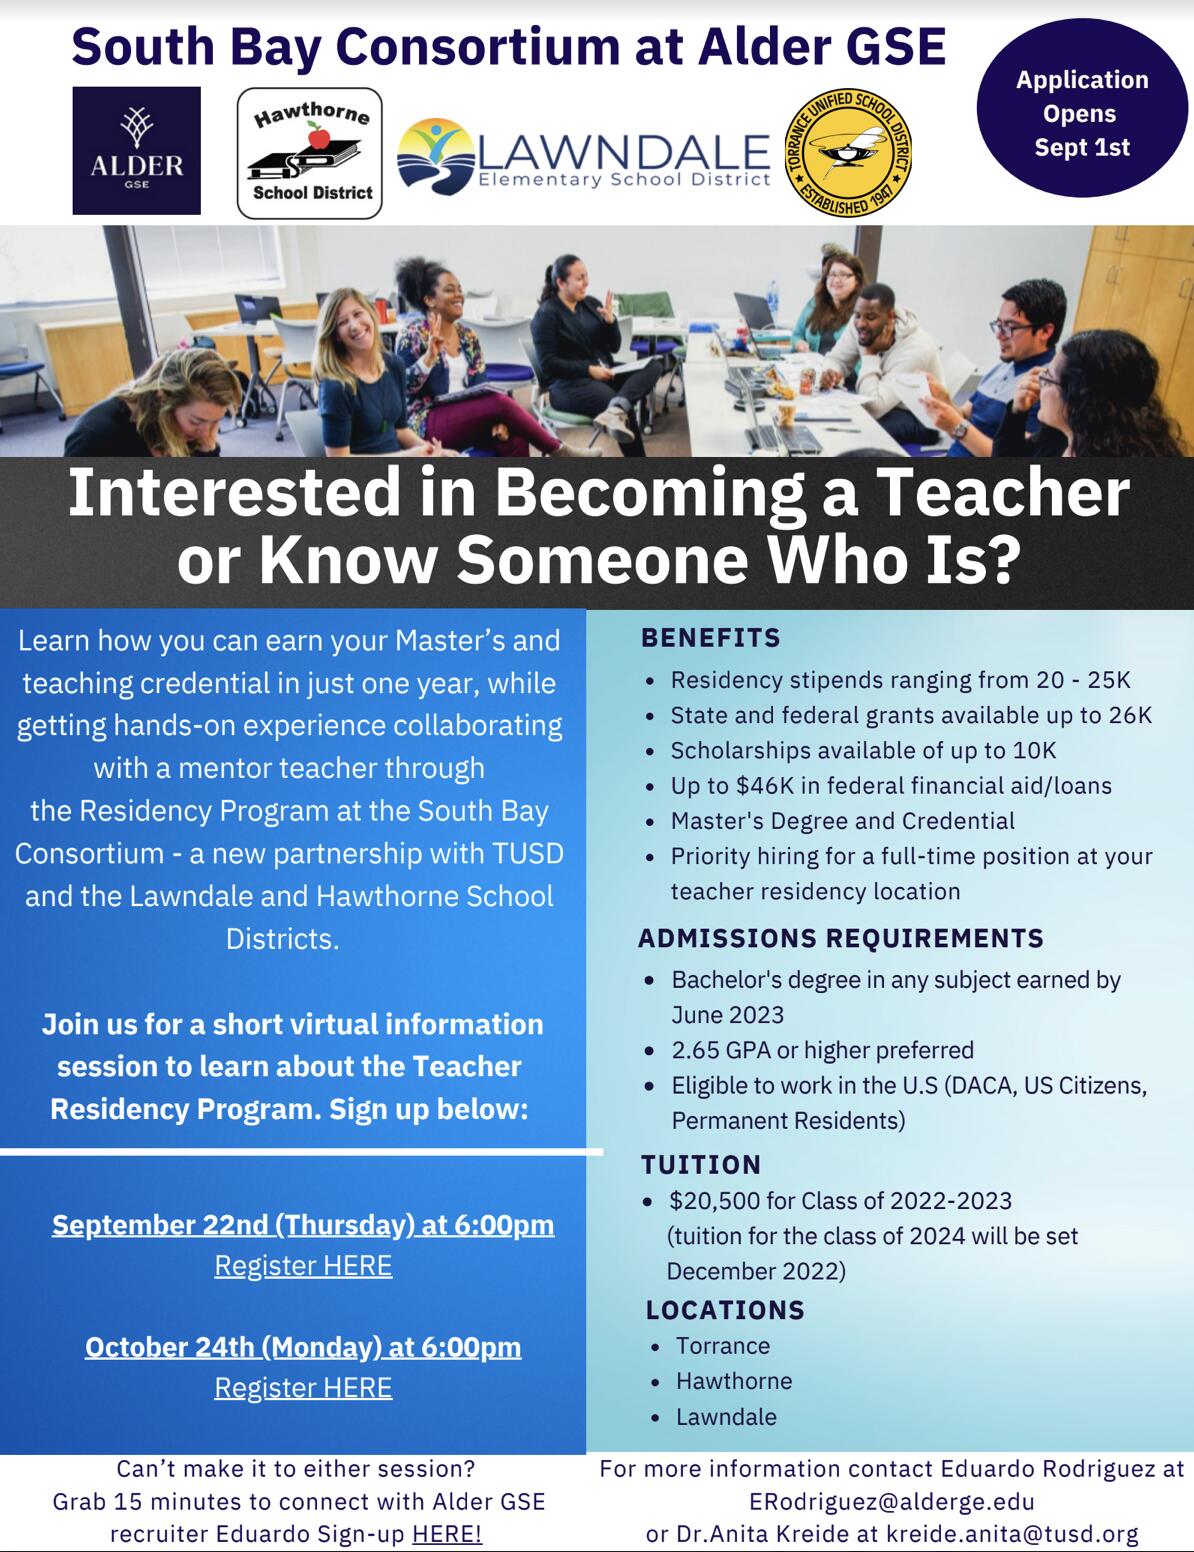 Are you interested in becoming a Teacher?